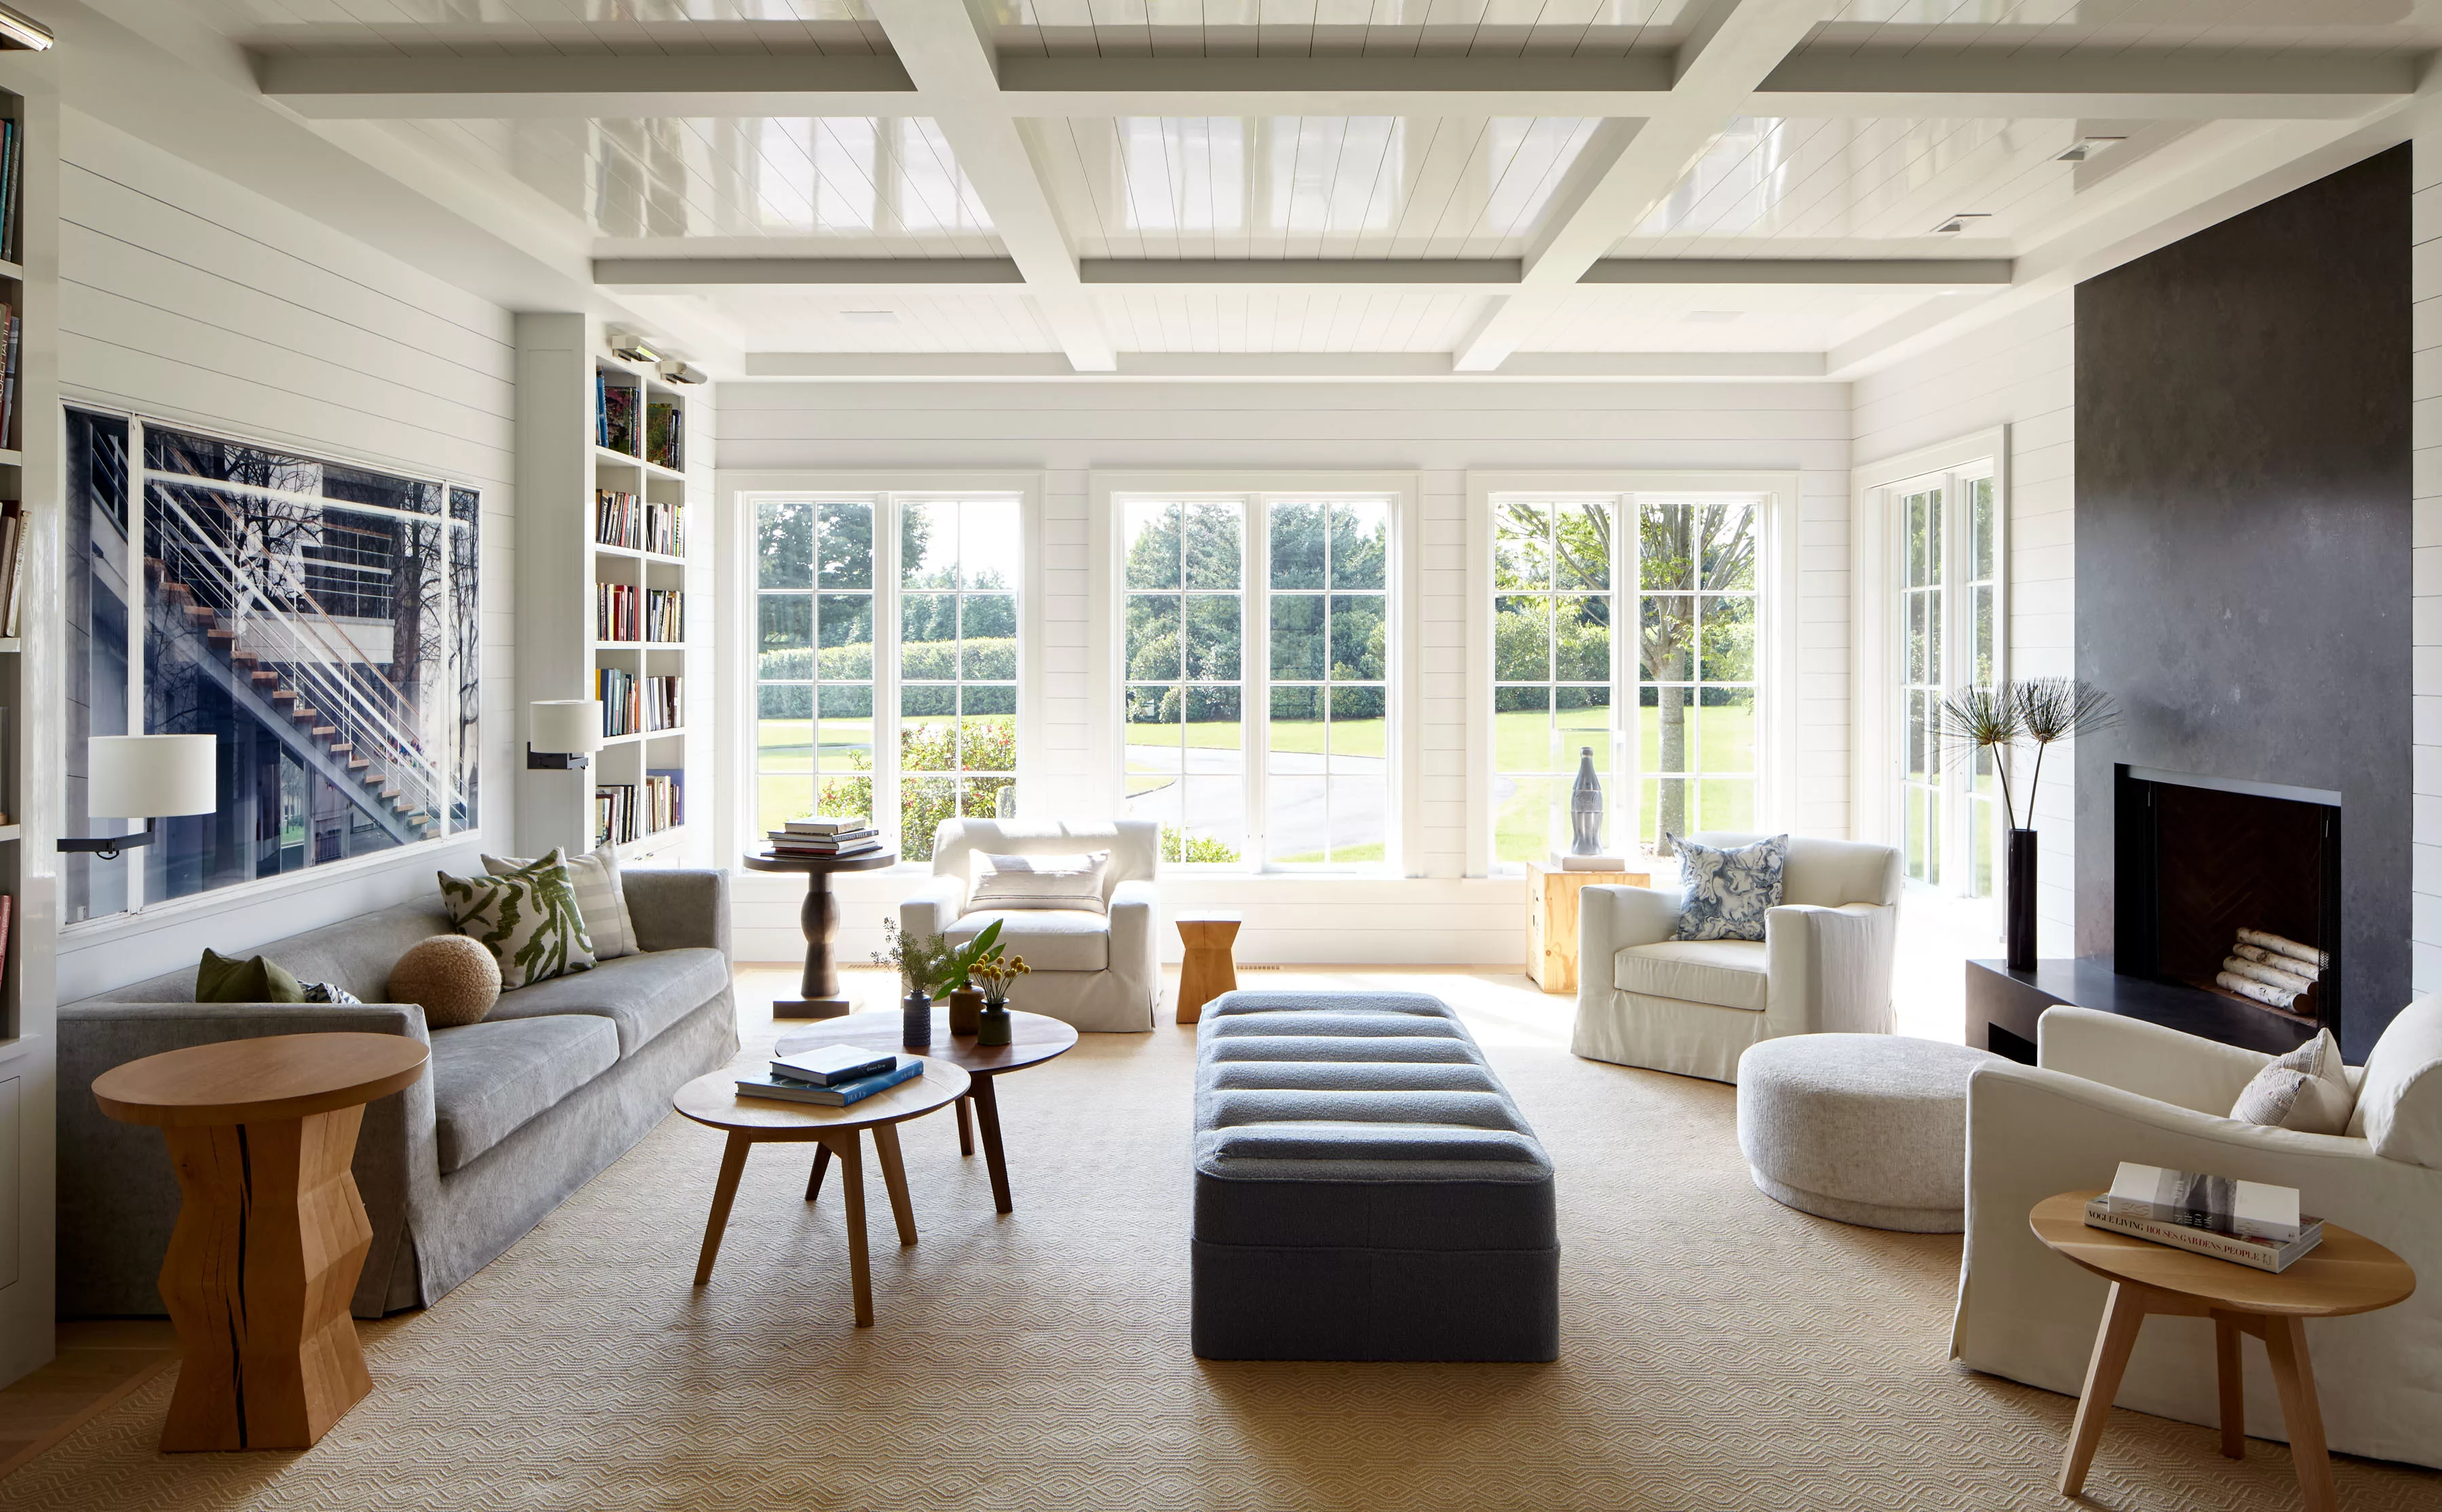 Bridgehampton Estate | Spacious Livingroom in Light Colors, Cozy Sofa and Chairs and Big Windows with Views of the Garden